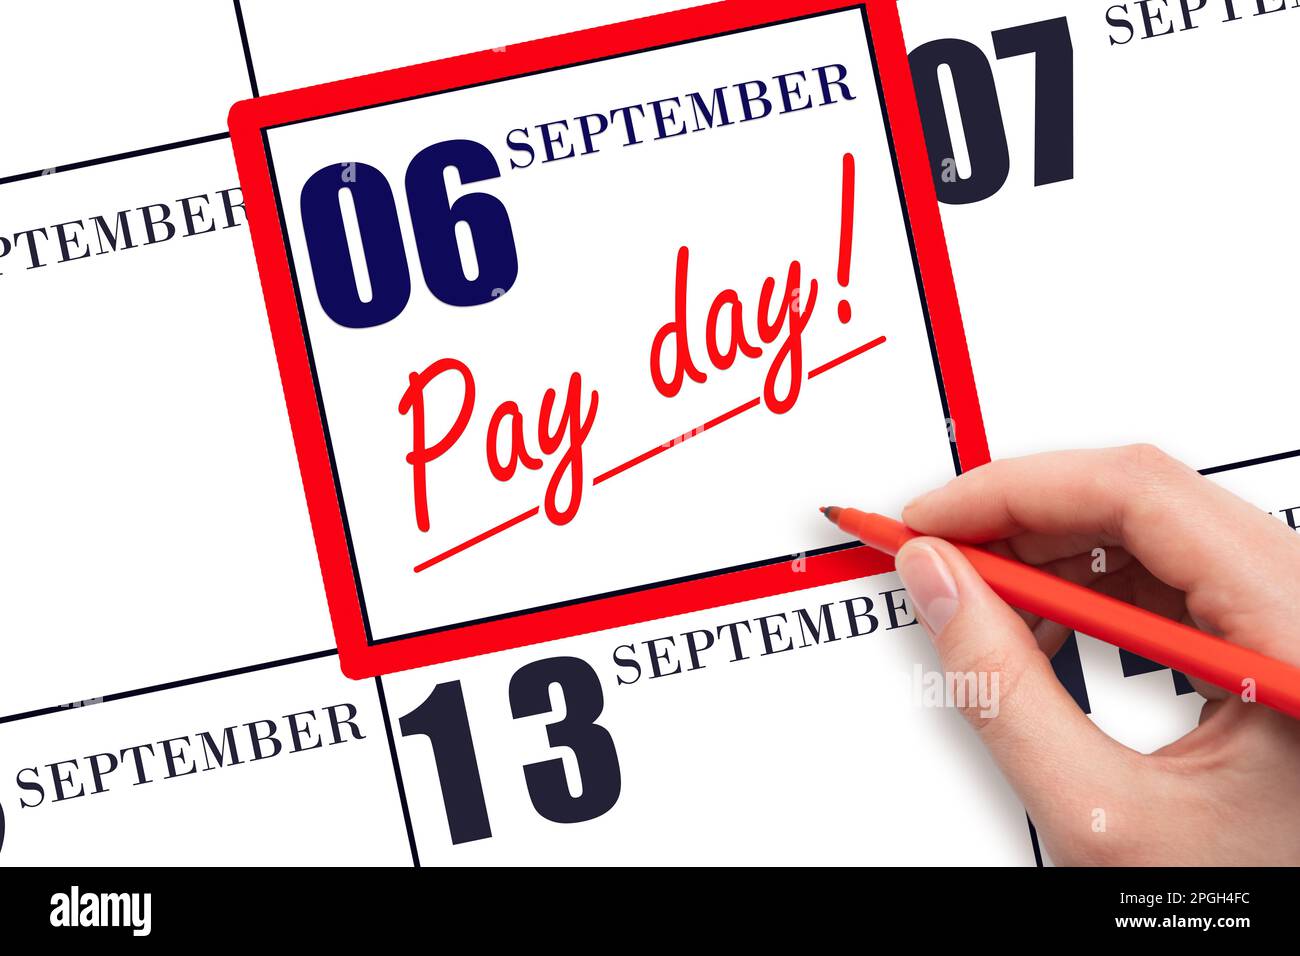 6th day of September. Hand writing text PAY DATE on calendar date September 6 and underline it. Payment due date. Reminder concept of payment. Autumn Stock Photo